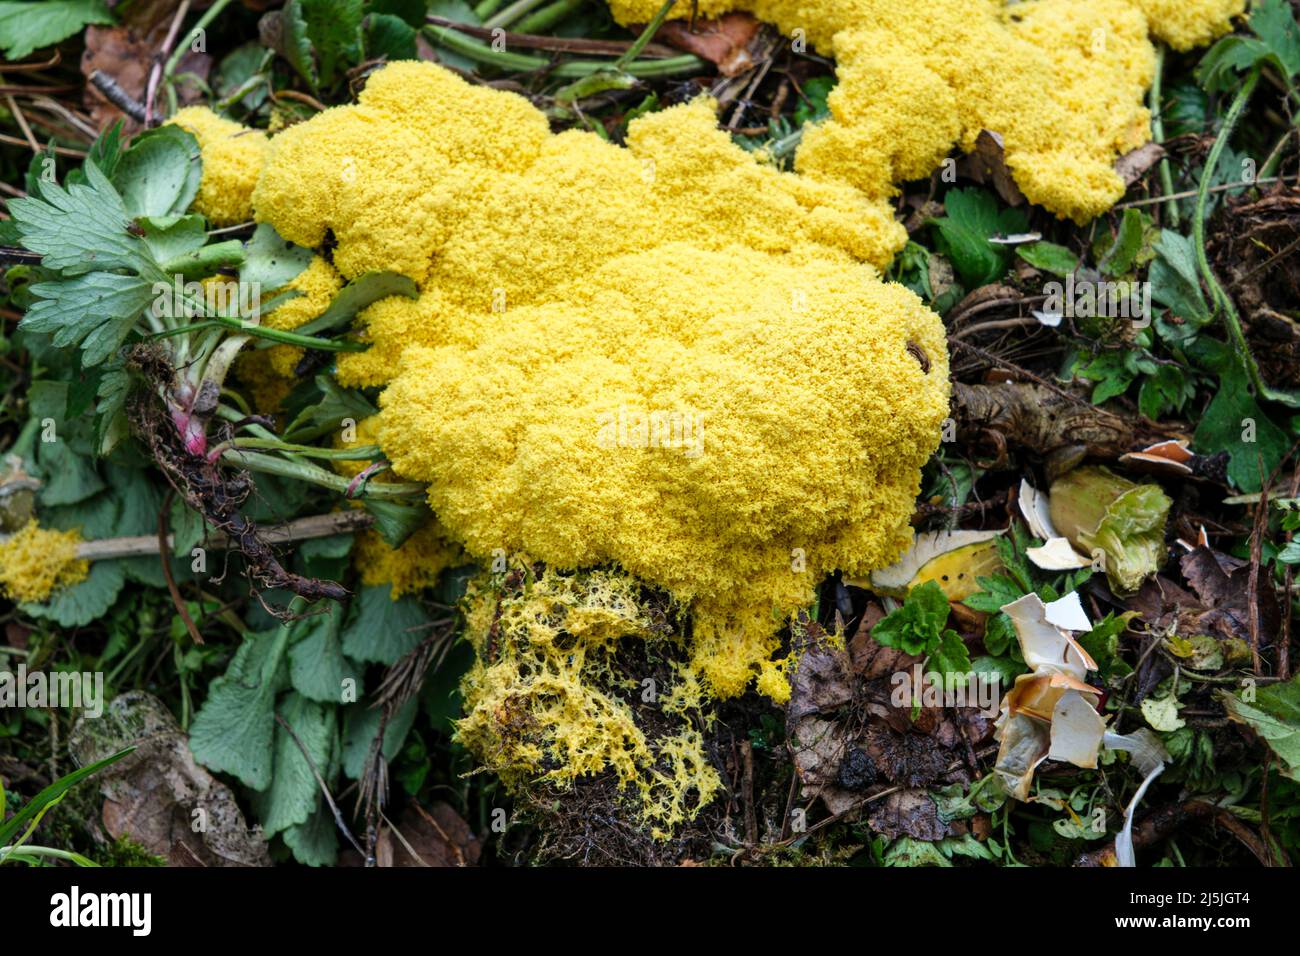 Dog's vomit slime mold (also known as scrambled egg slime or flowers of tan), Fuligo septica, growing on a compost heap Stock Photo